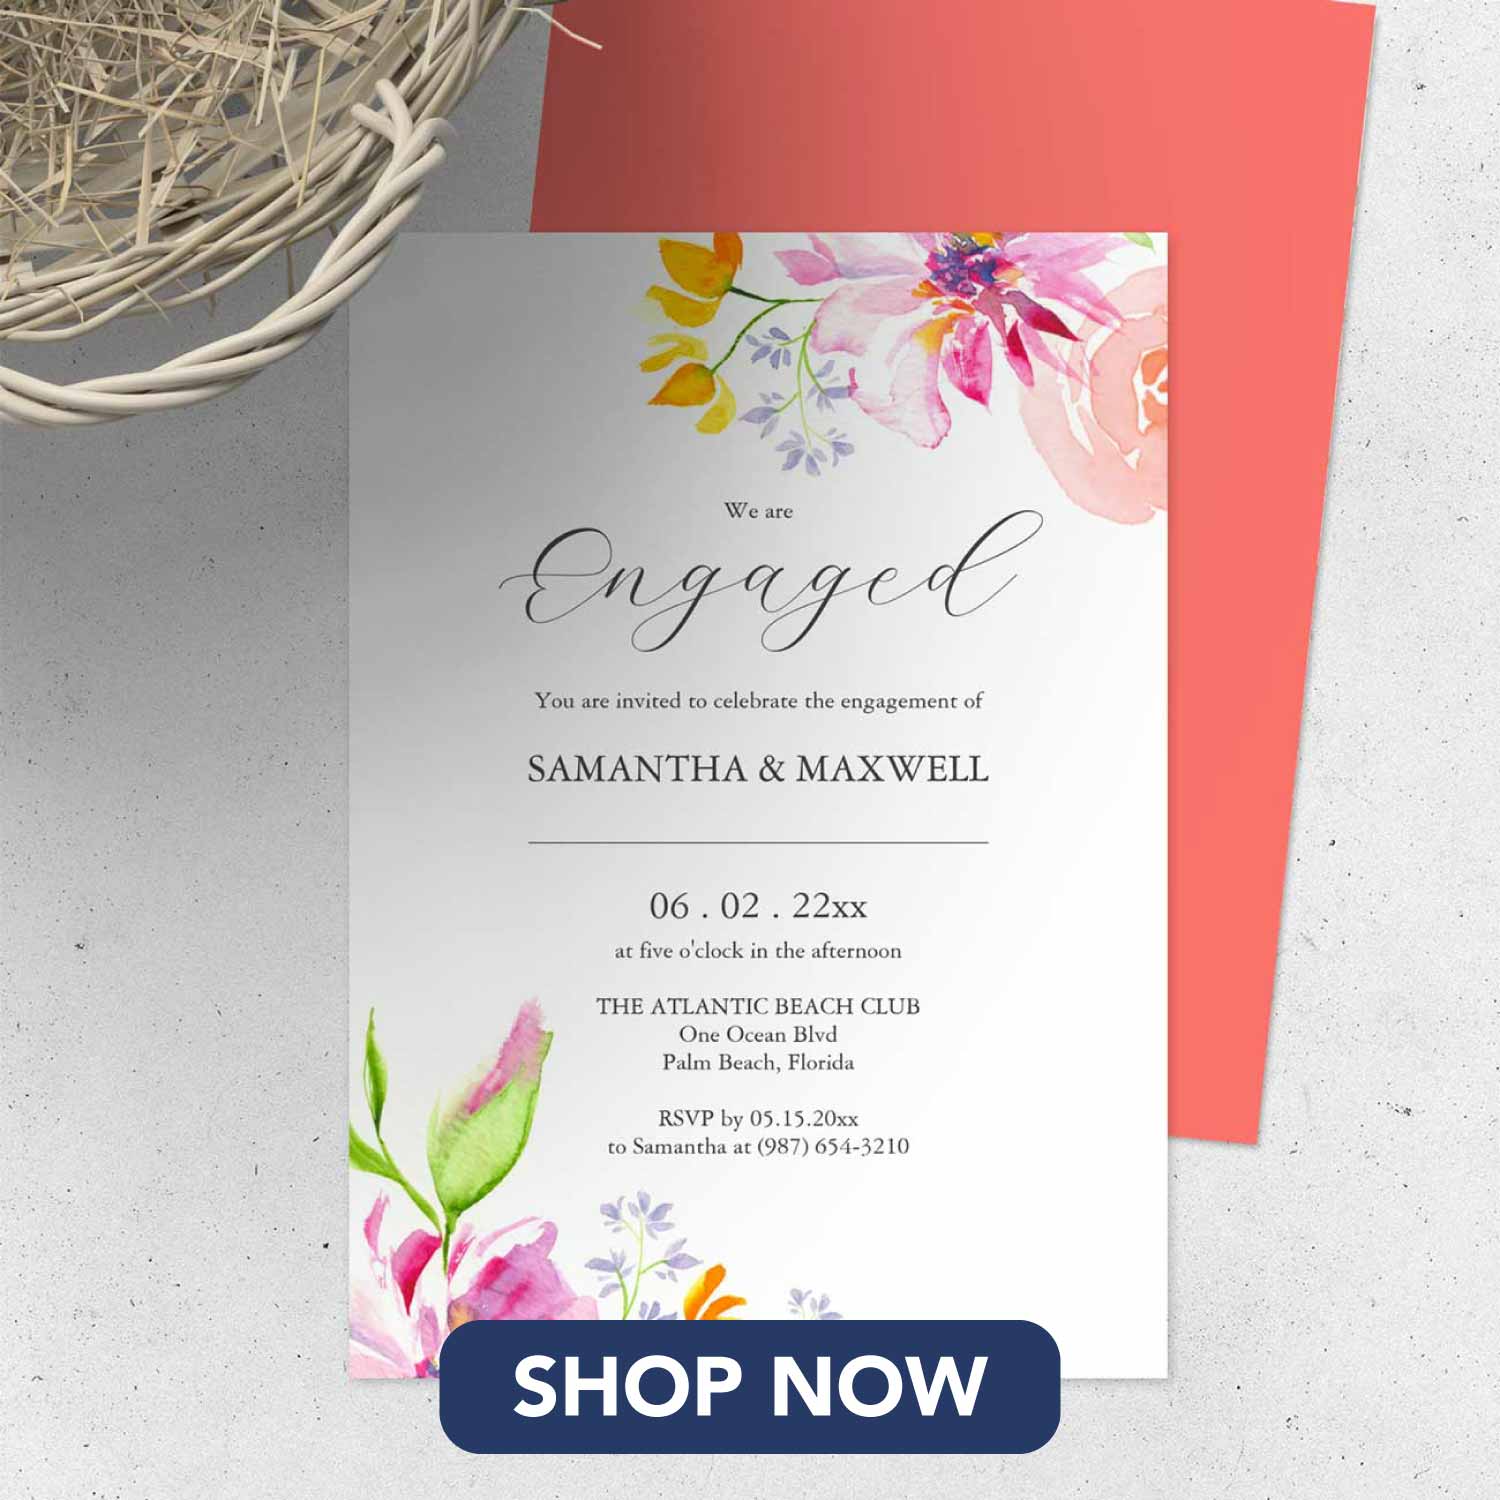 Engagement party invitations features unique floral watercolor art by Victoria Grigaliunas of Do Tell A Belle